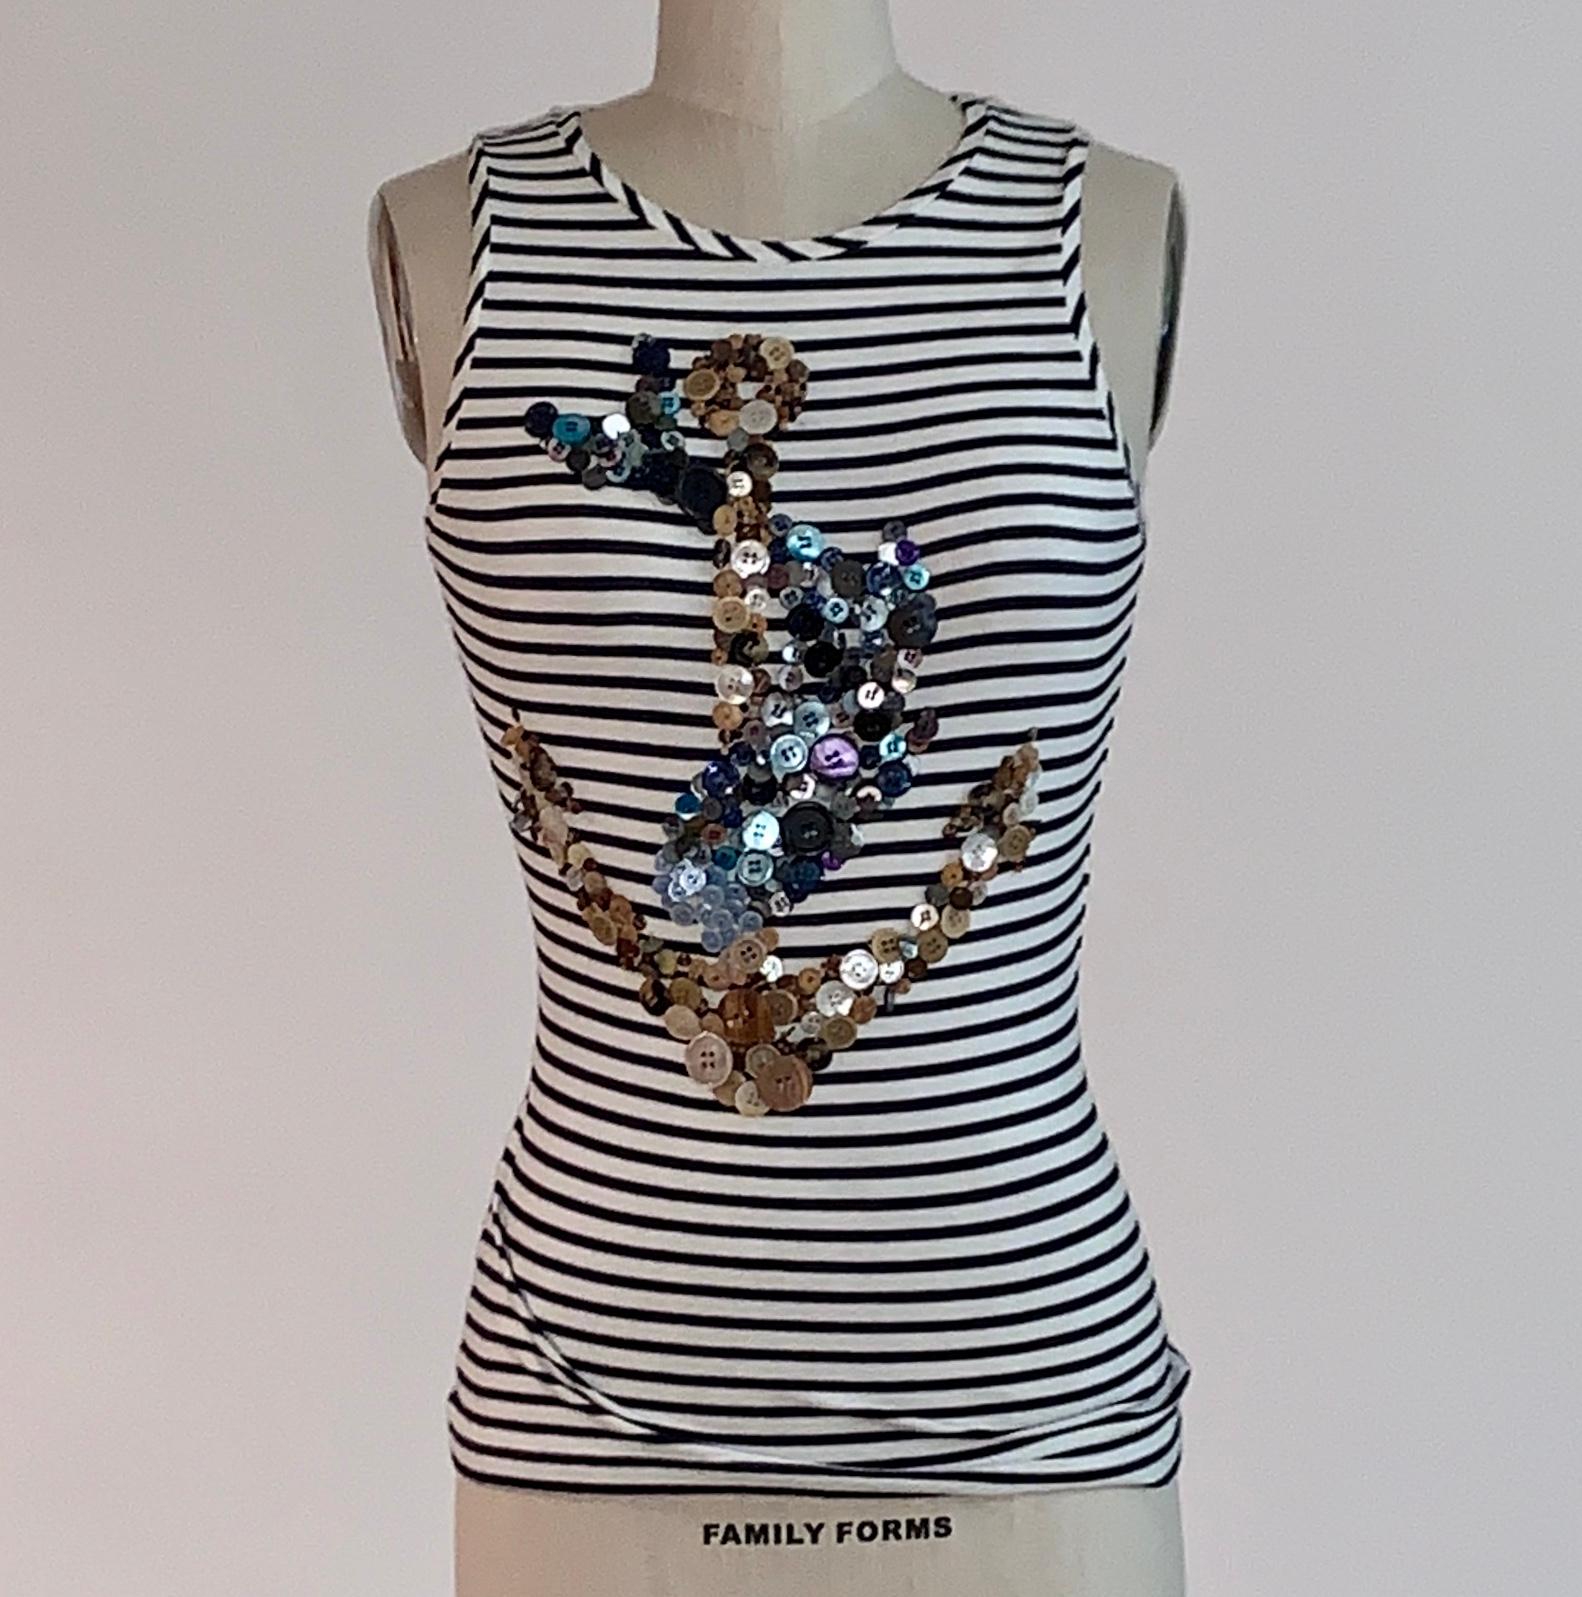 Alexander McQueen 2005 deep navy (almost black) and white stripe tank top with button embellishment forming a fish swimming around an anchor. 

97% rayon, 3 % spandex.

Made in Italy.

Size IT 38, approximate US 2. Seen on size 2 dress form. 
Very